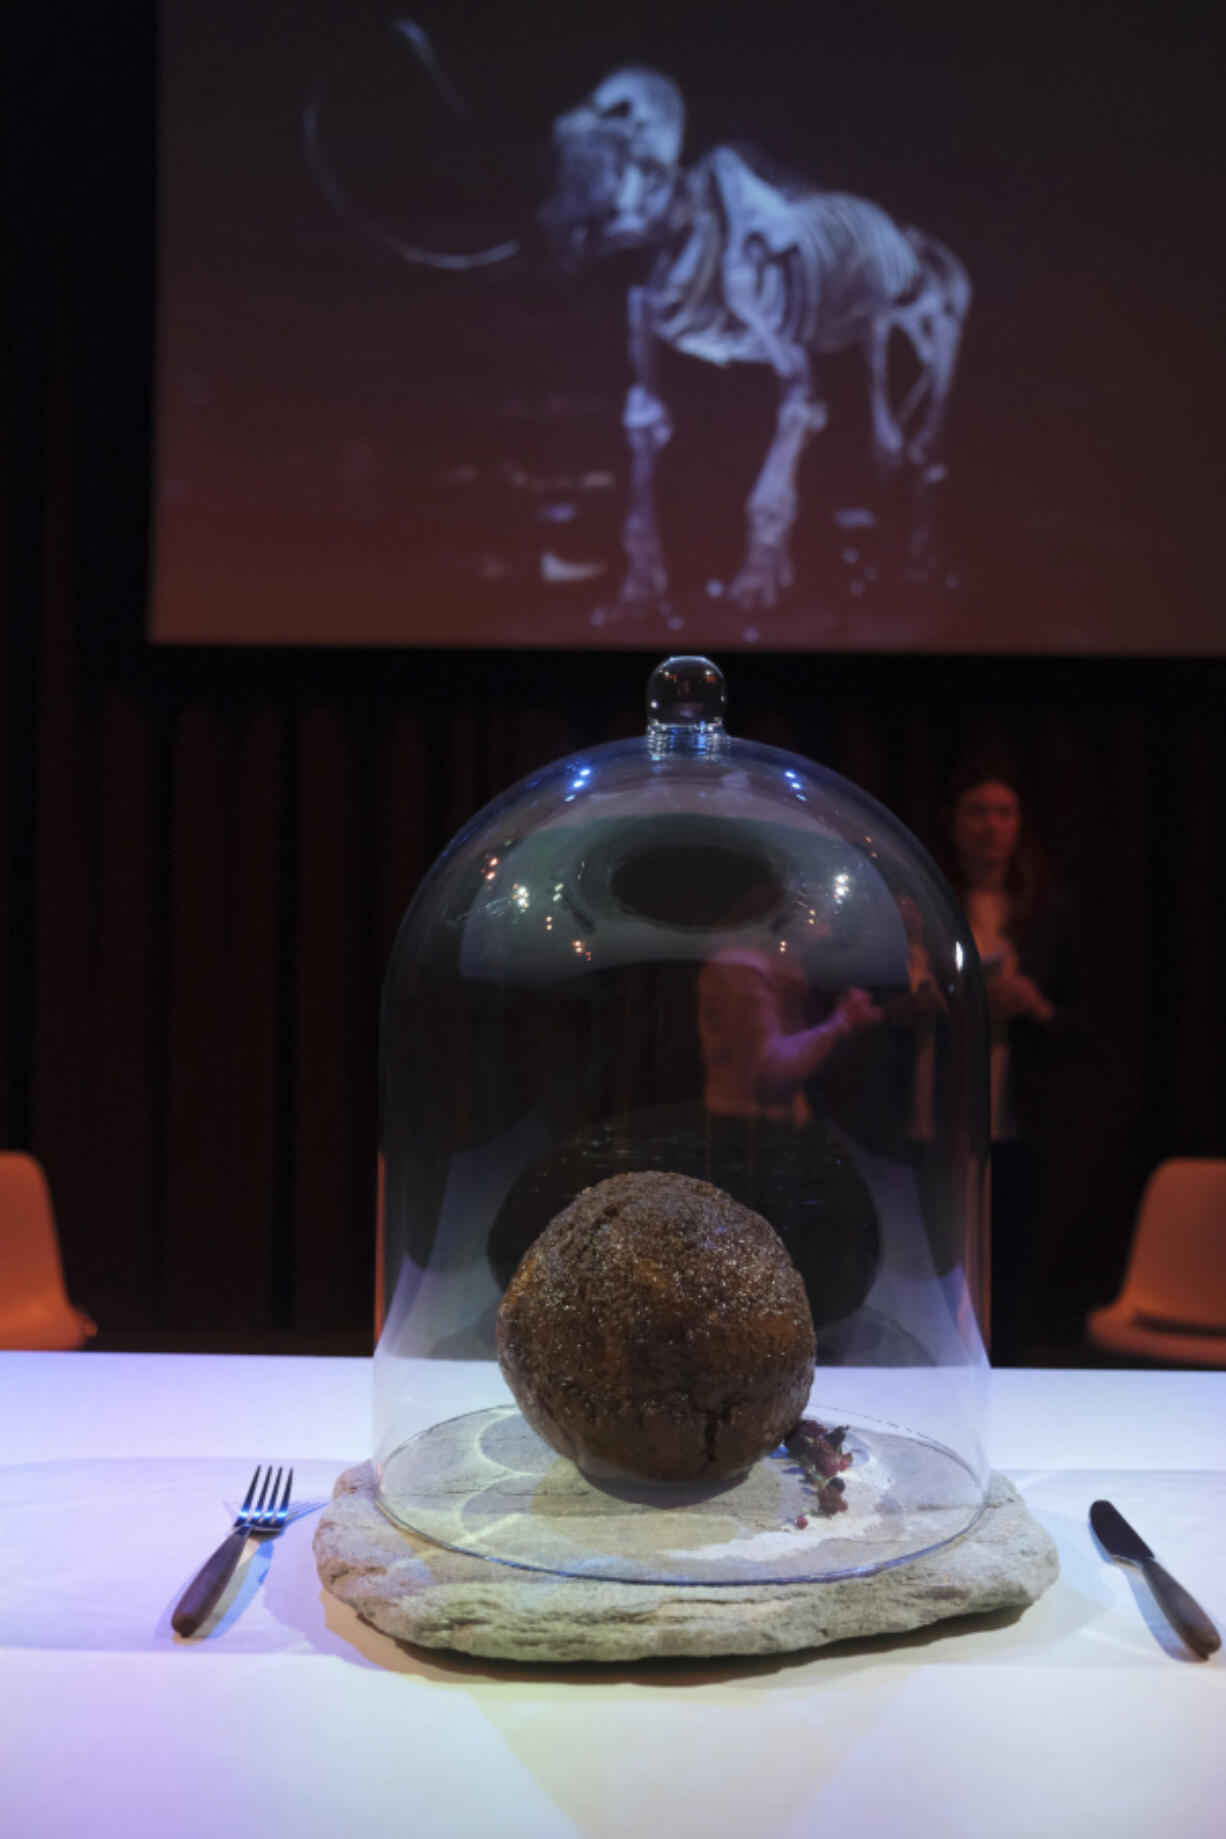 A meatball made using genetic code from the mammoth is seen March 28 at the Nemo science museum in Amsterdam.